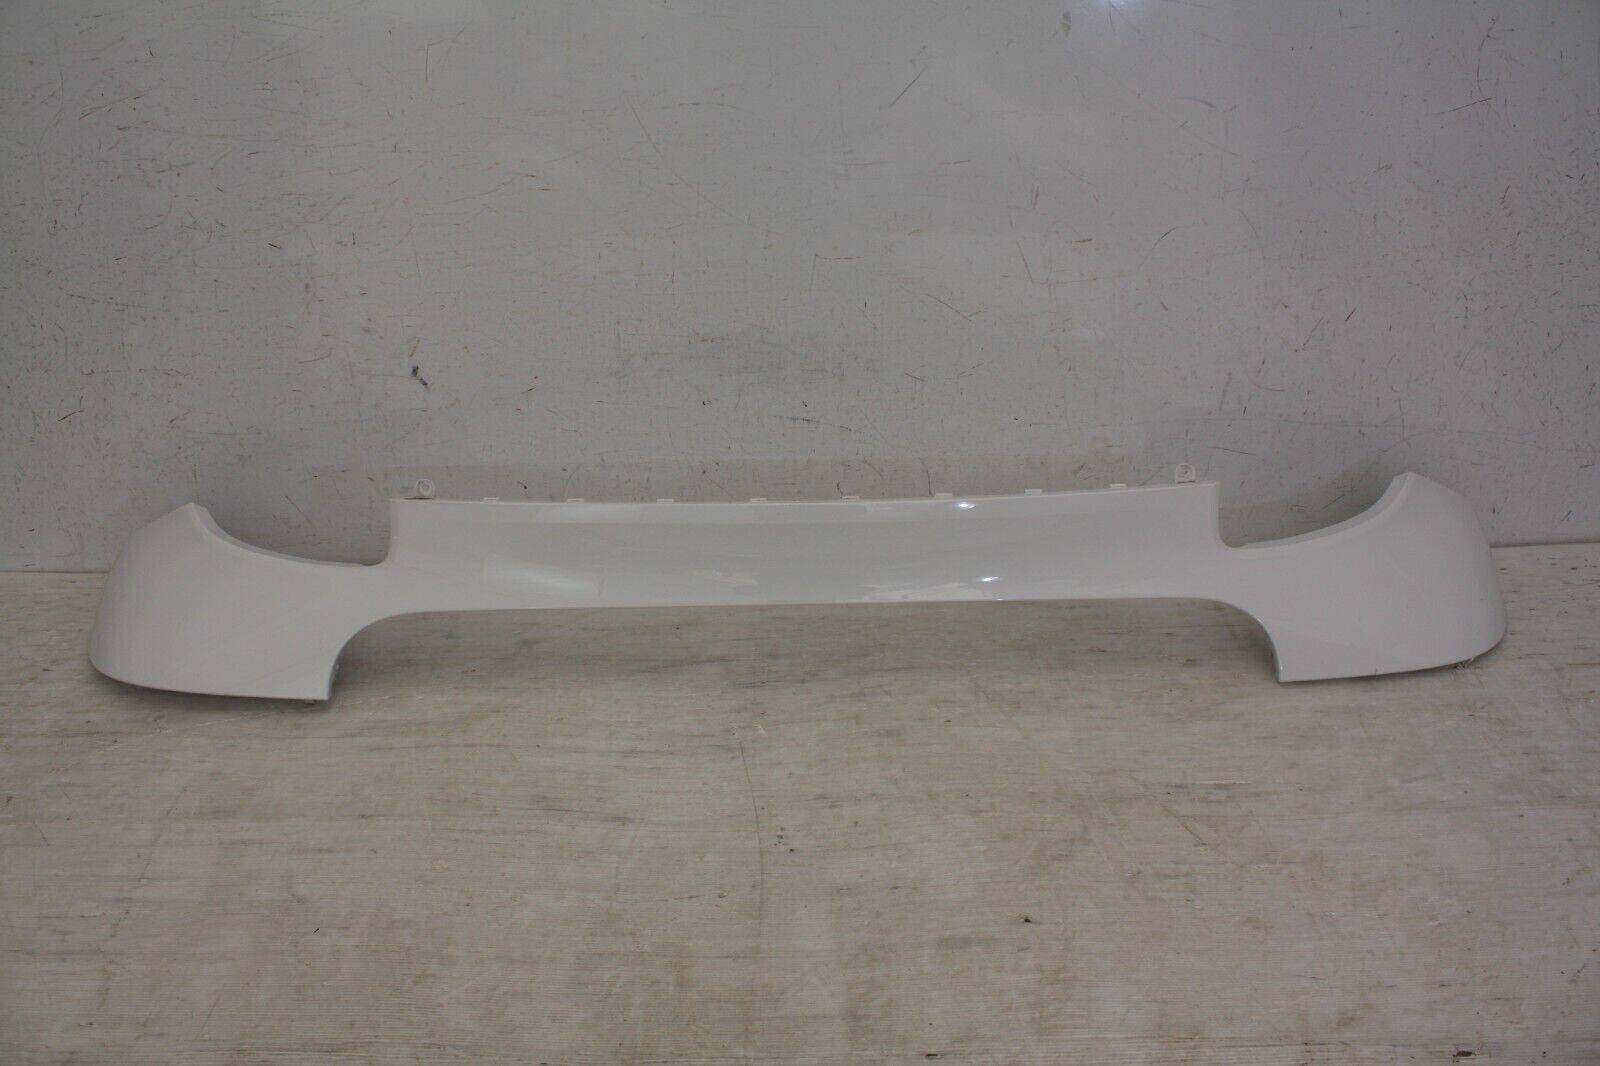 Smart Fortwo EQ W453 Front Bumper Upper Section 2020 on A4538802005 Genuine 176001347255